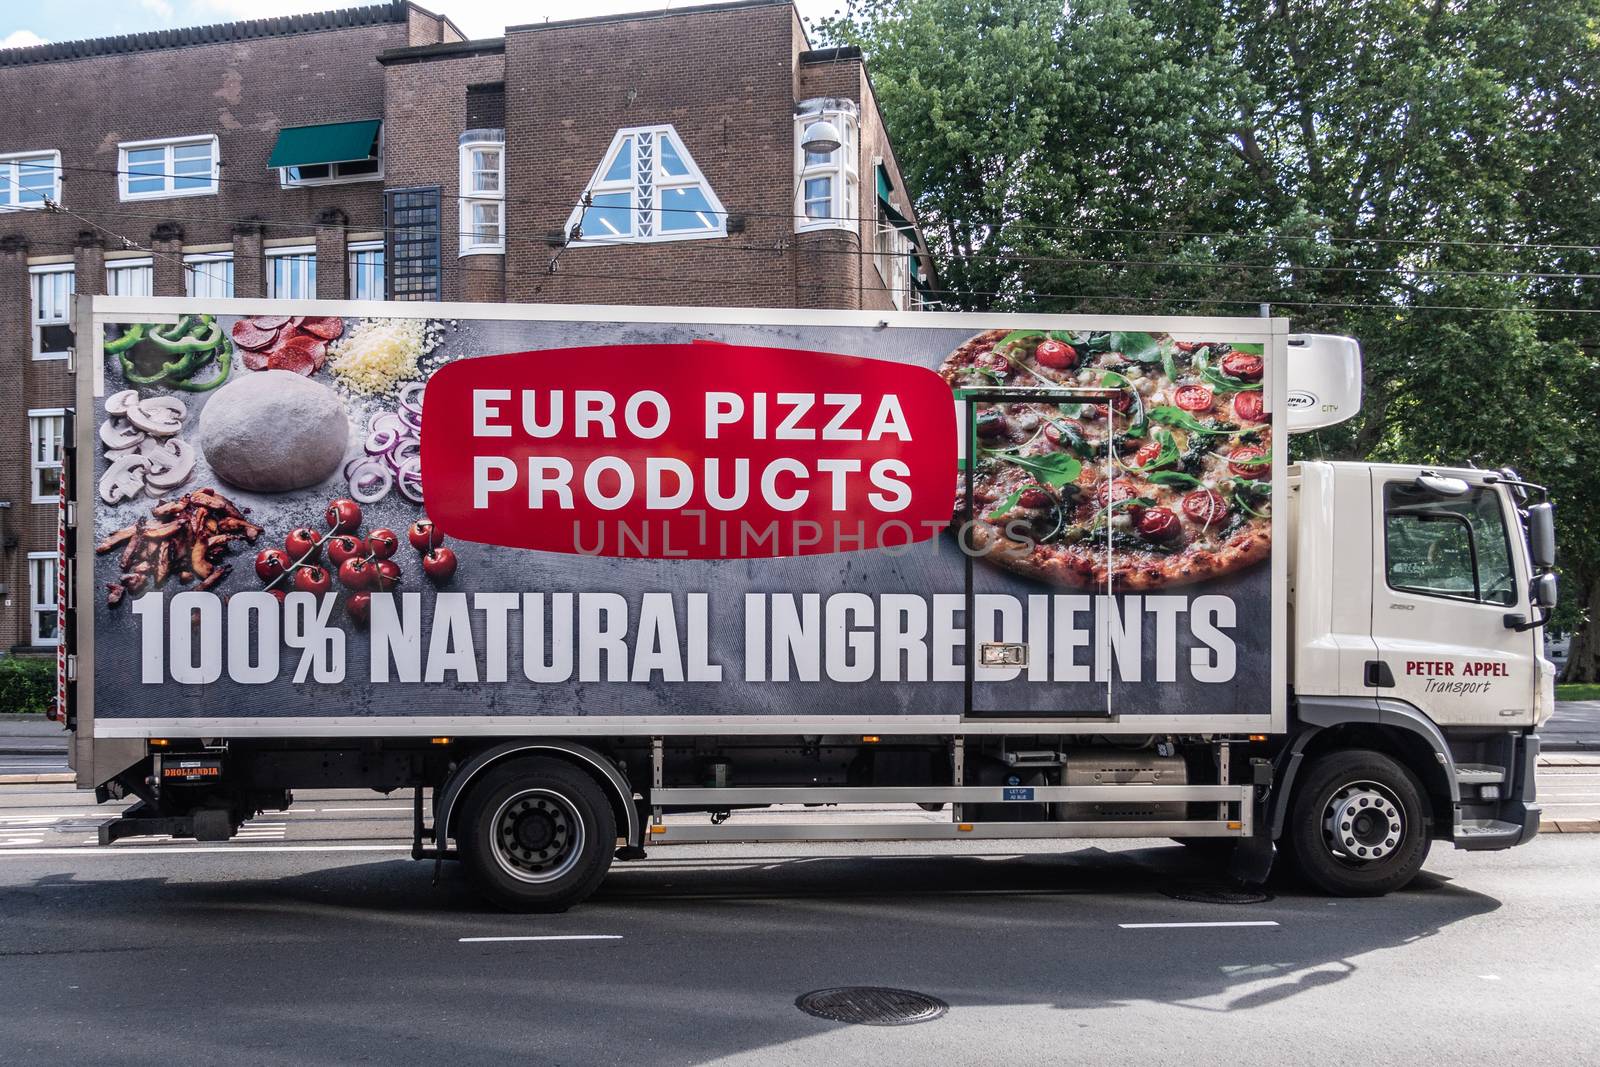 Euro Pizza producer delivery truck in Amsterdam Netherlands. by Claudine